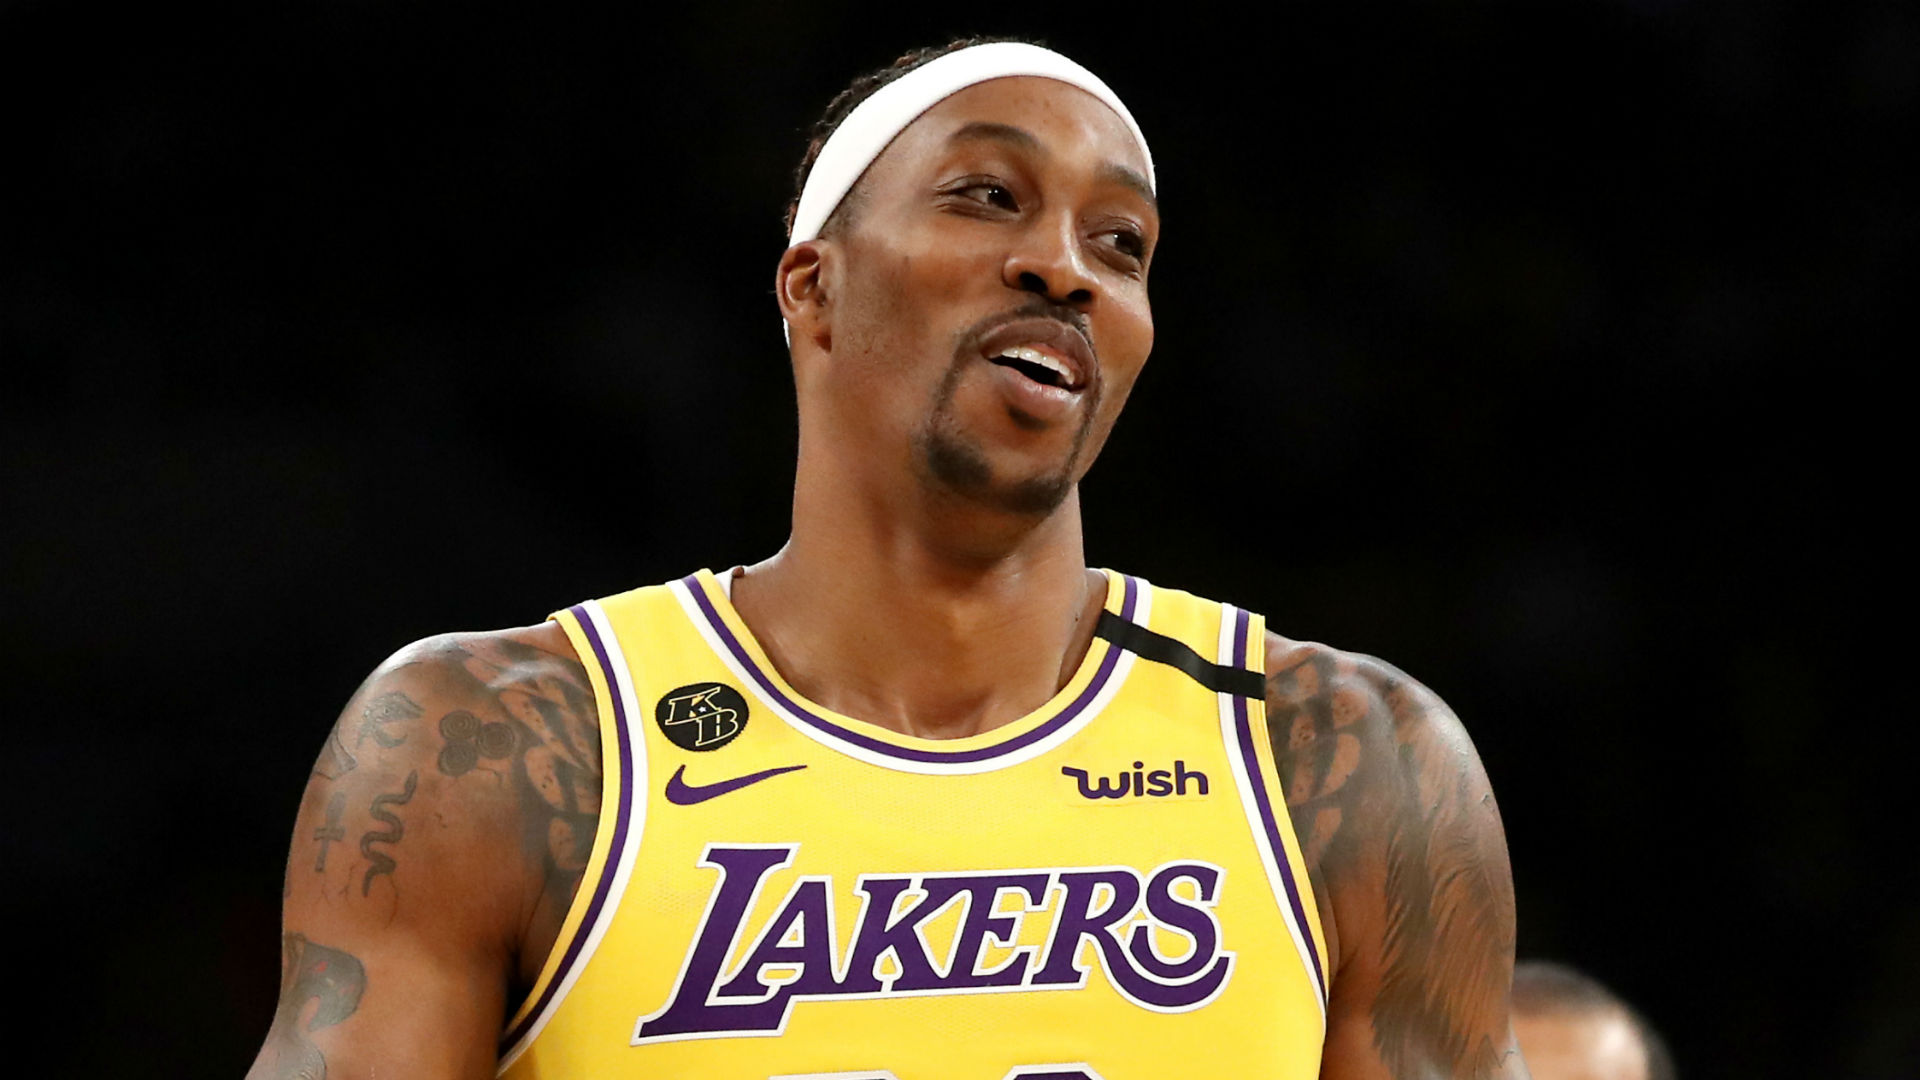 Having initially cast doubt on whether he would play in Orlando, Dwight Howard has confirmed he will be with the Los Angeles Lakers.